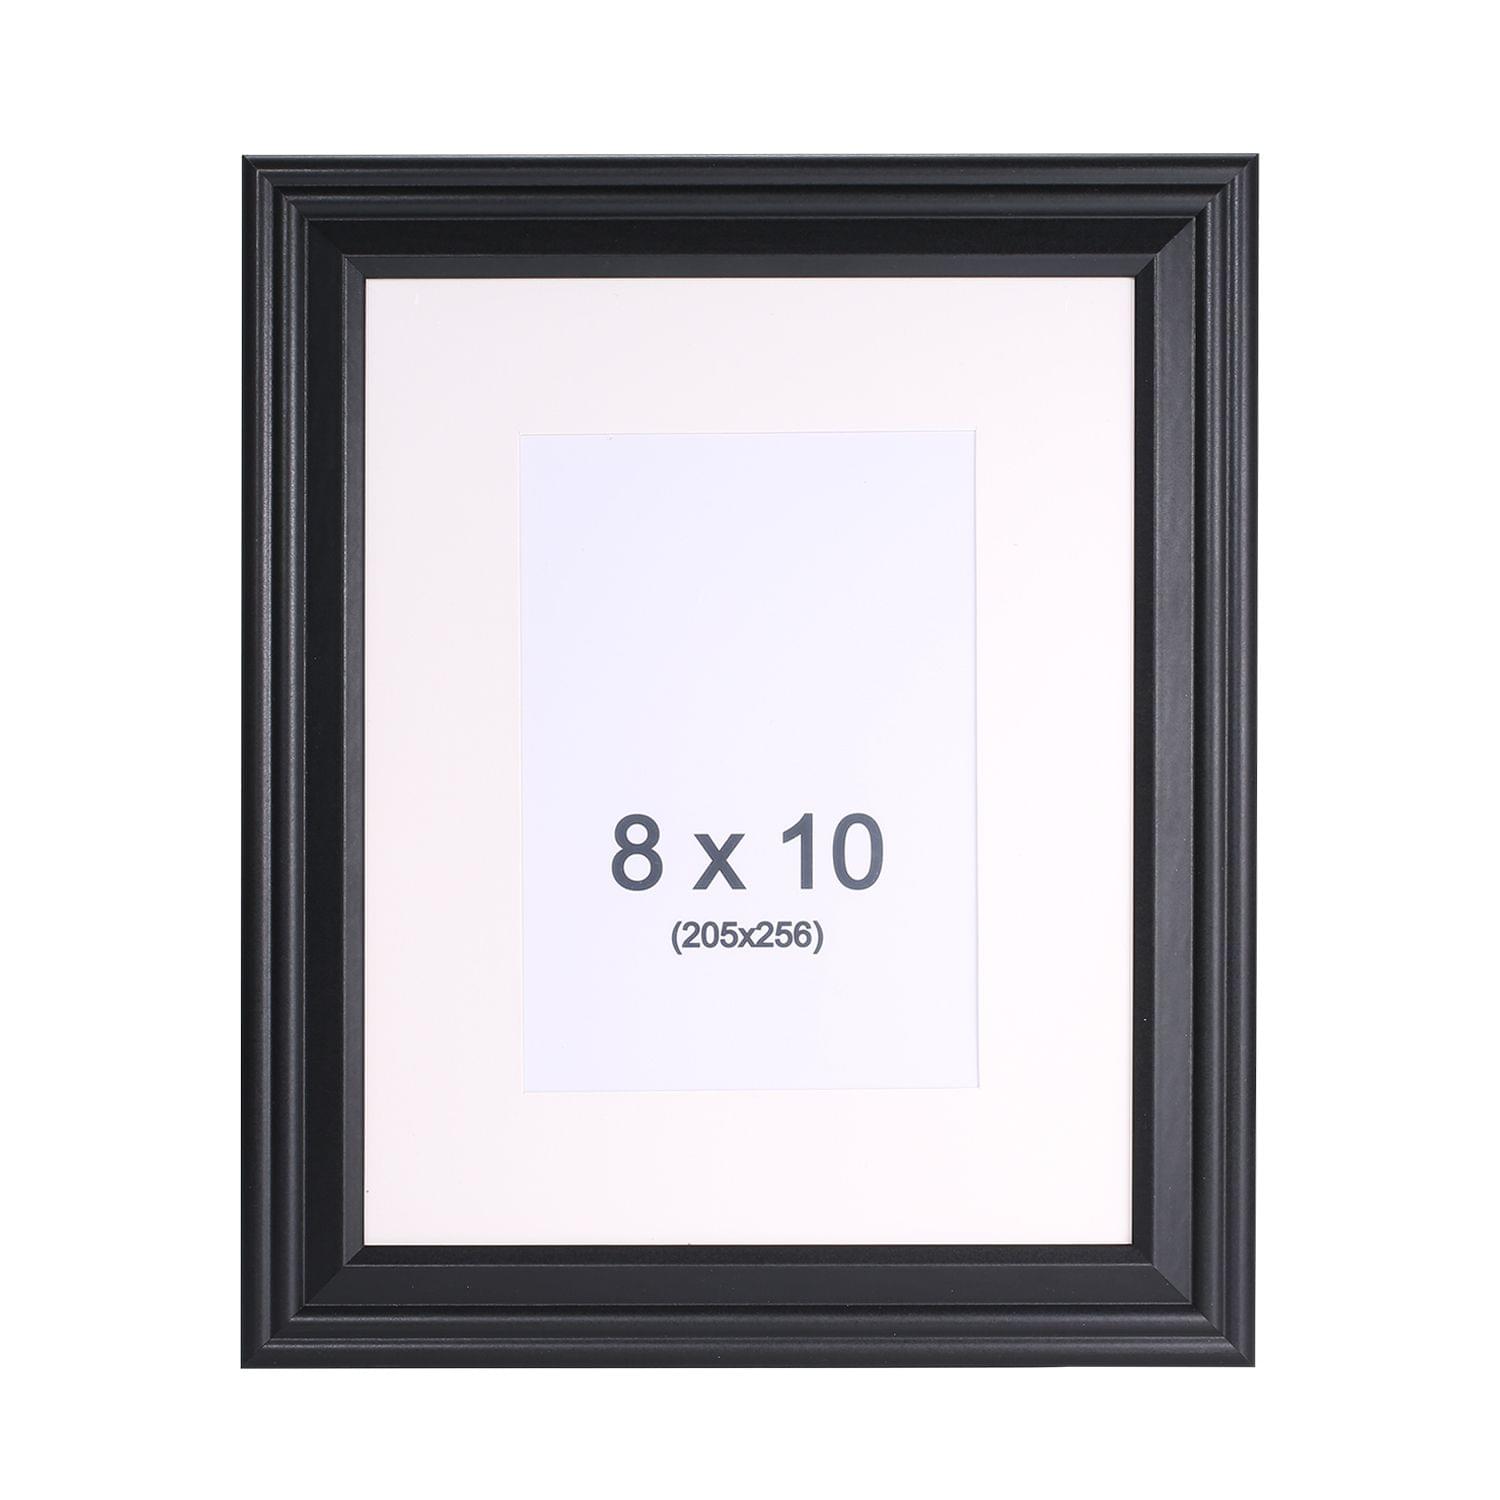 Wooden Photo Frame 130 * 90mm Picture Size Hanging Design